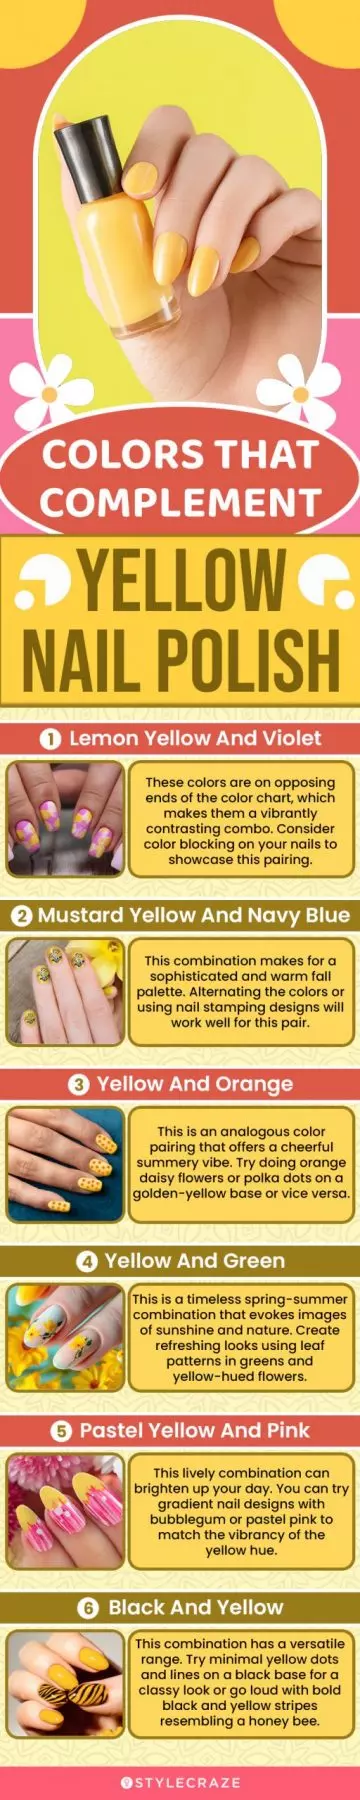 Colors That Complement Yellow Nail Polish (infographic)